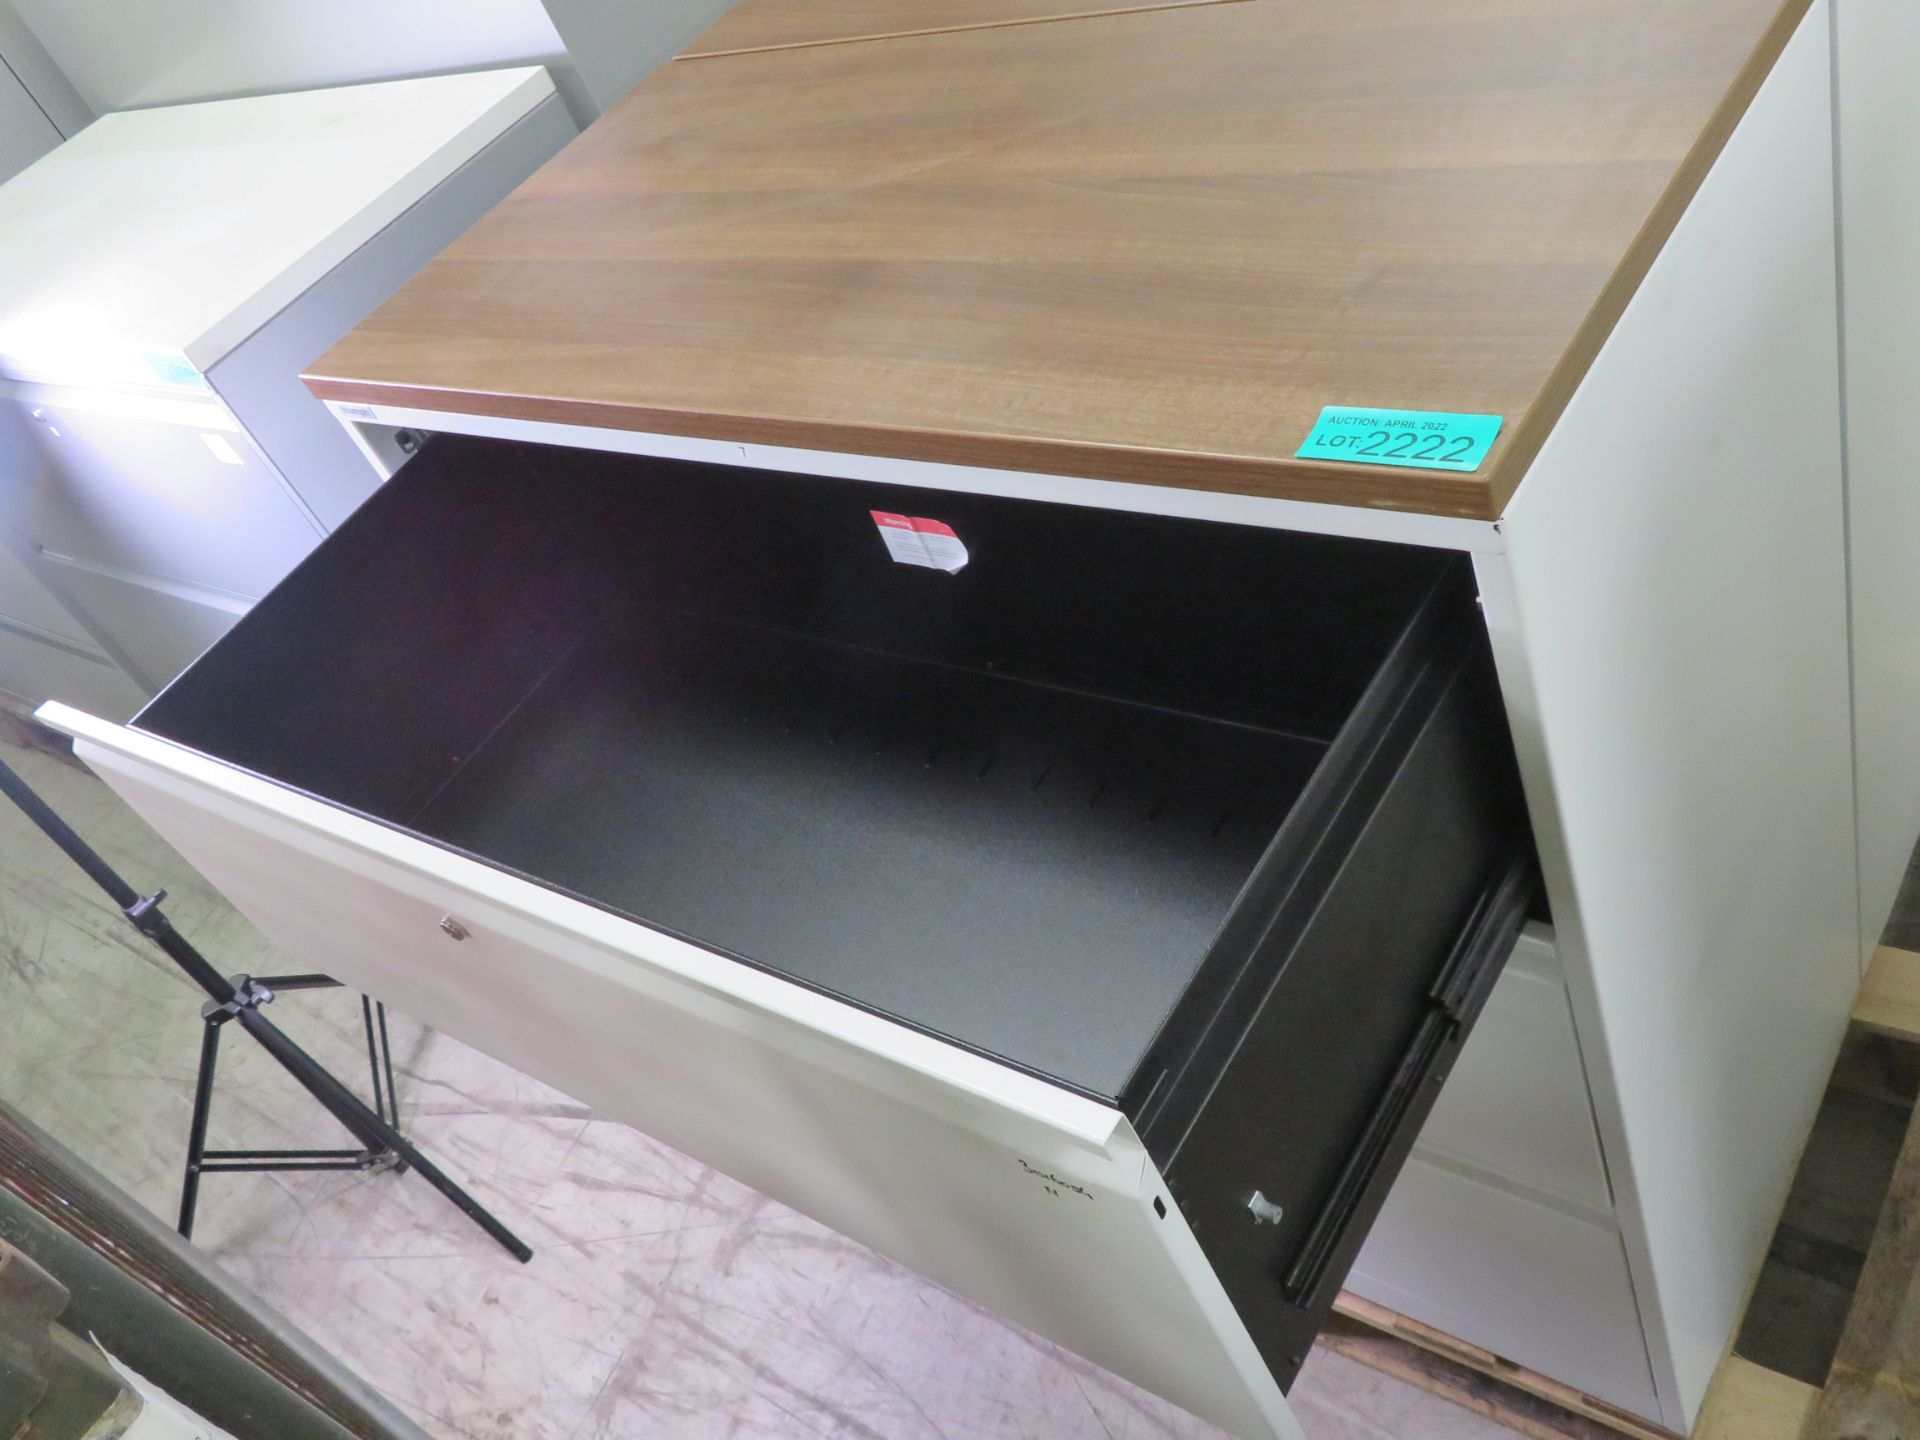 3 Drawer Wooden Top Filing Cabinet L 1000mm x W 480mm x H 1000mm - Image 2 of 3